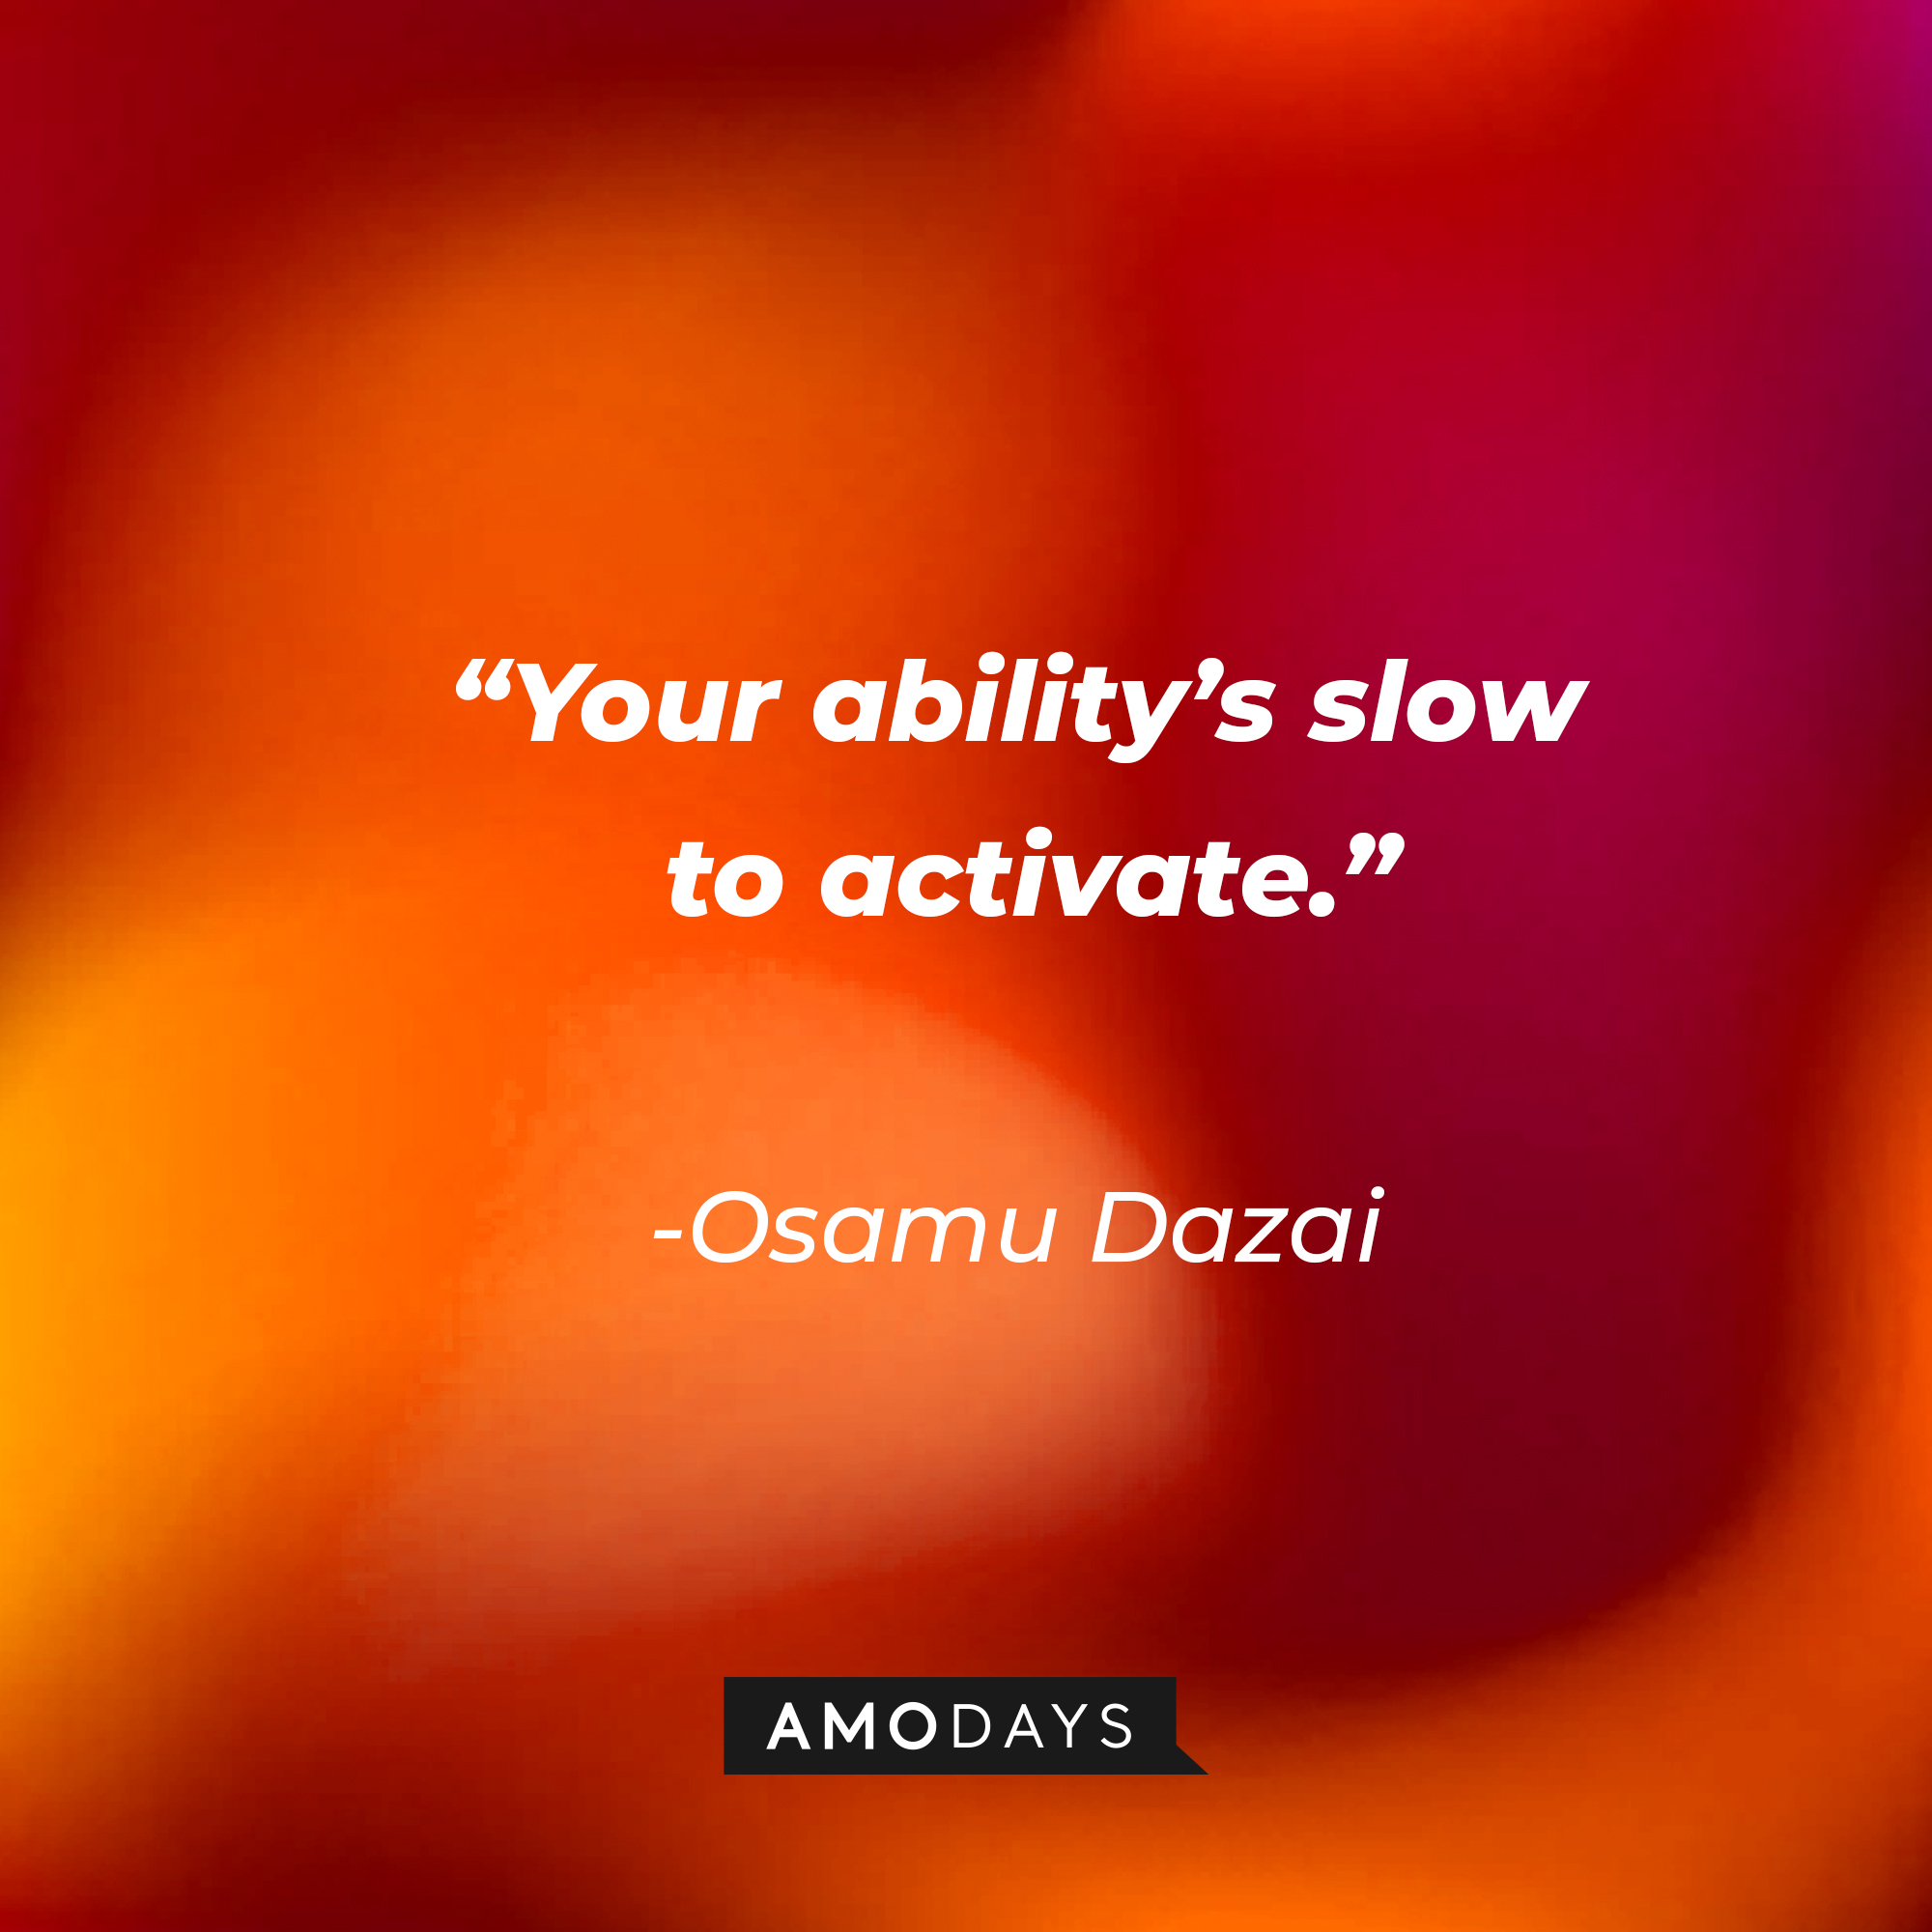 Osamu Dazai’s quote: “Your ability’s slow to activate.” | Source: AmoDays